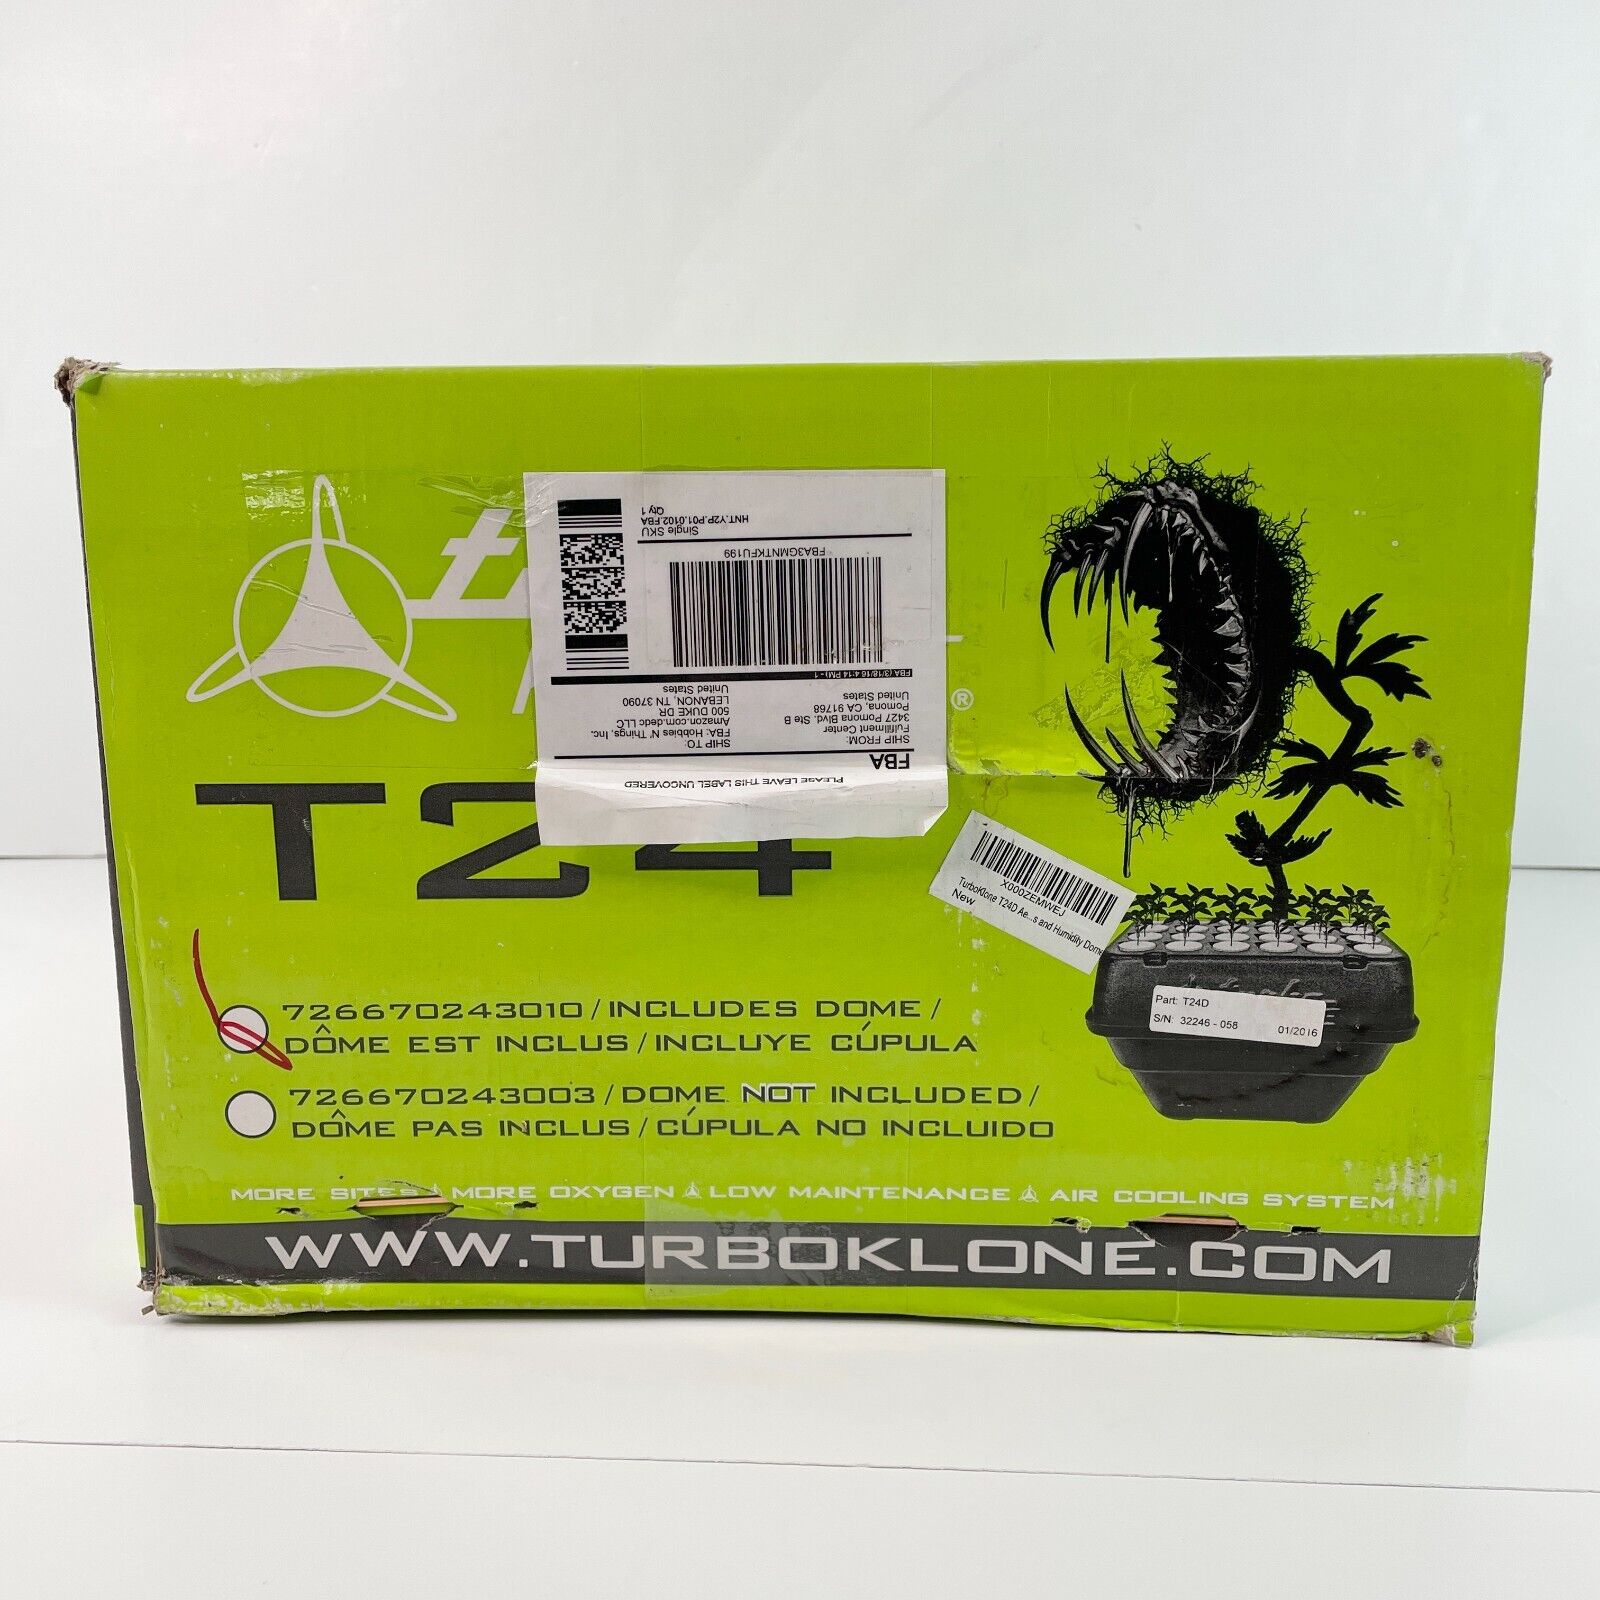 TurboKlone T24 with Built-In Fan and Humidity Dome - Brand New in Original Box